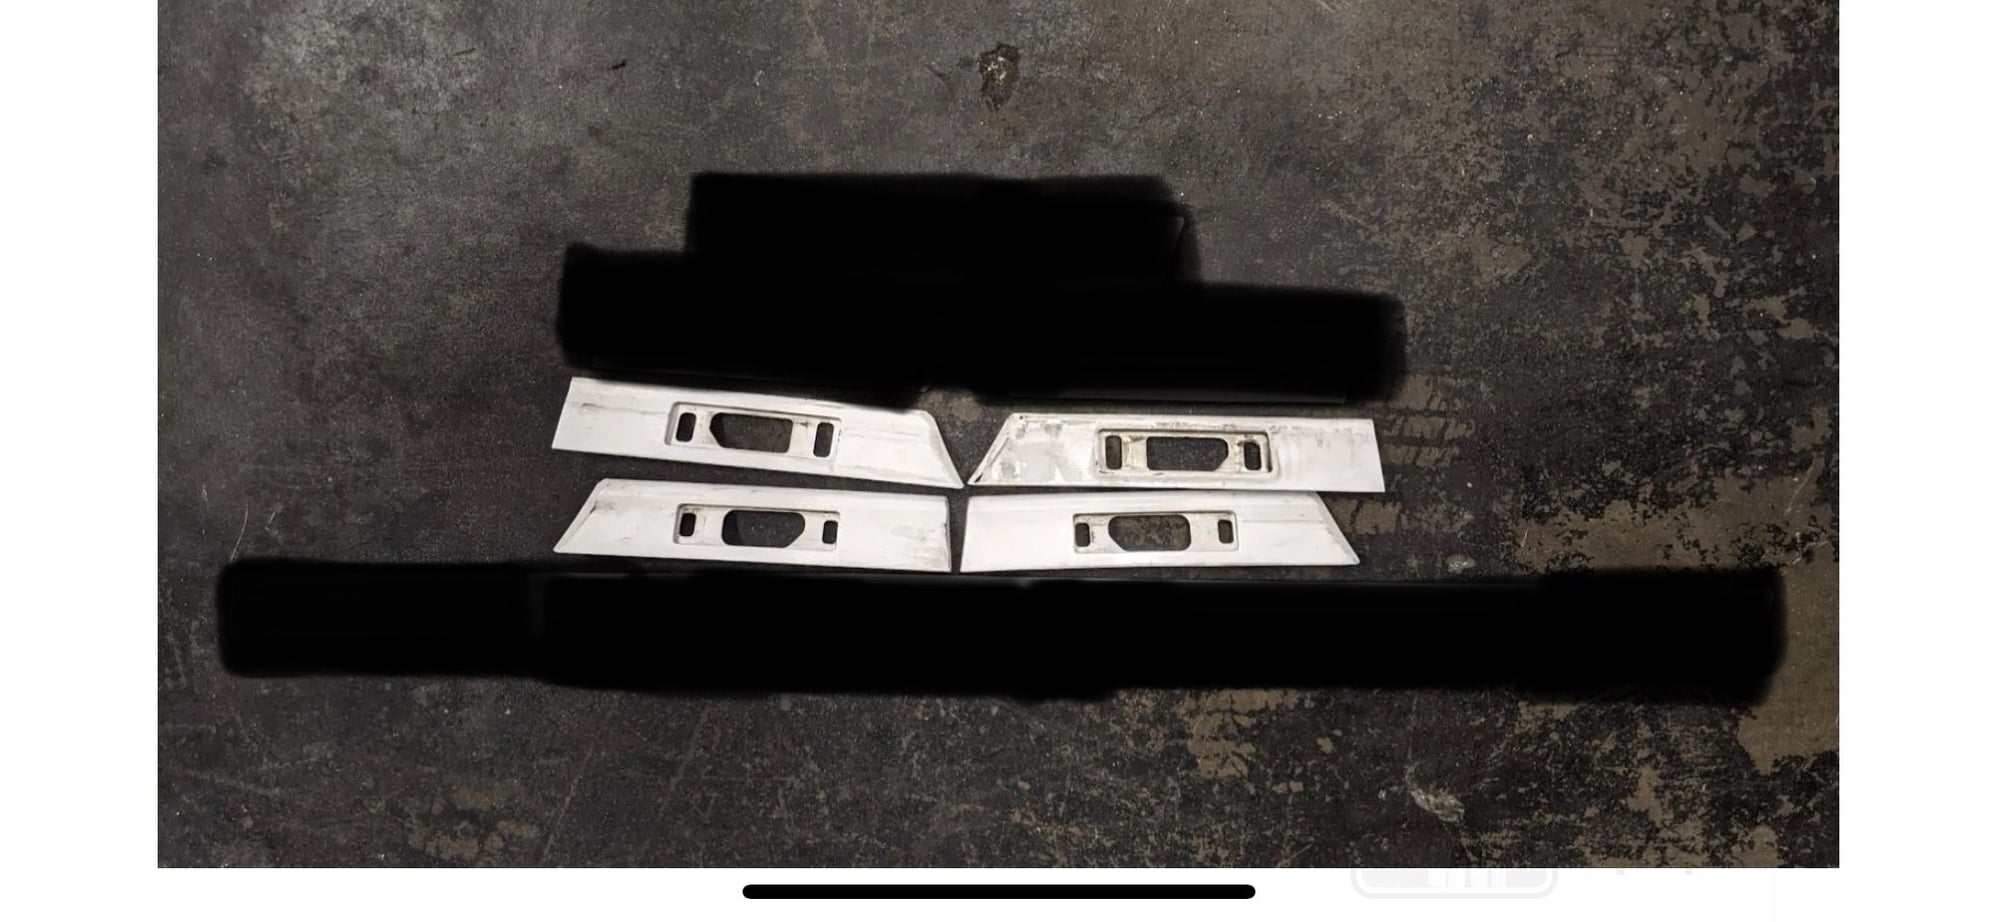 Exterior Body Parts - Wanted 89-91 S5 Fender & Quarter Panel Trim/Molding for the Side Markers - Used - 1989 to 1991 Mazda RX-7 - San Leandro, CA 94579, United States